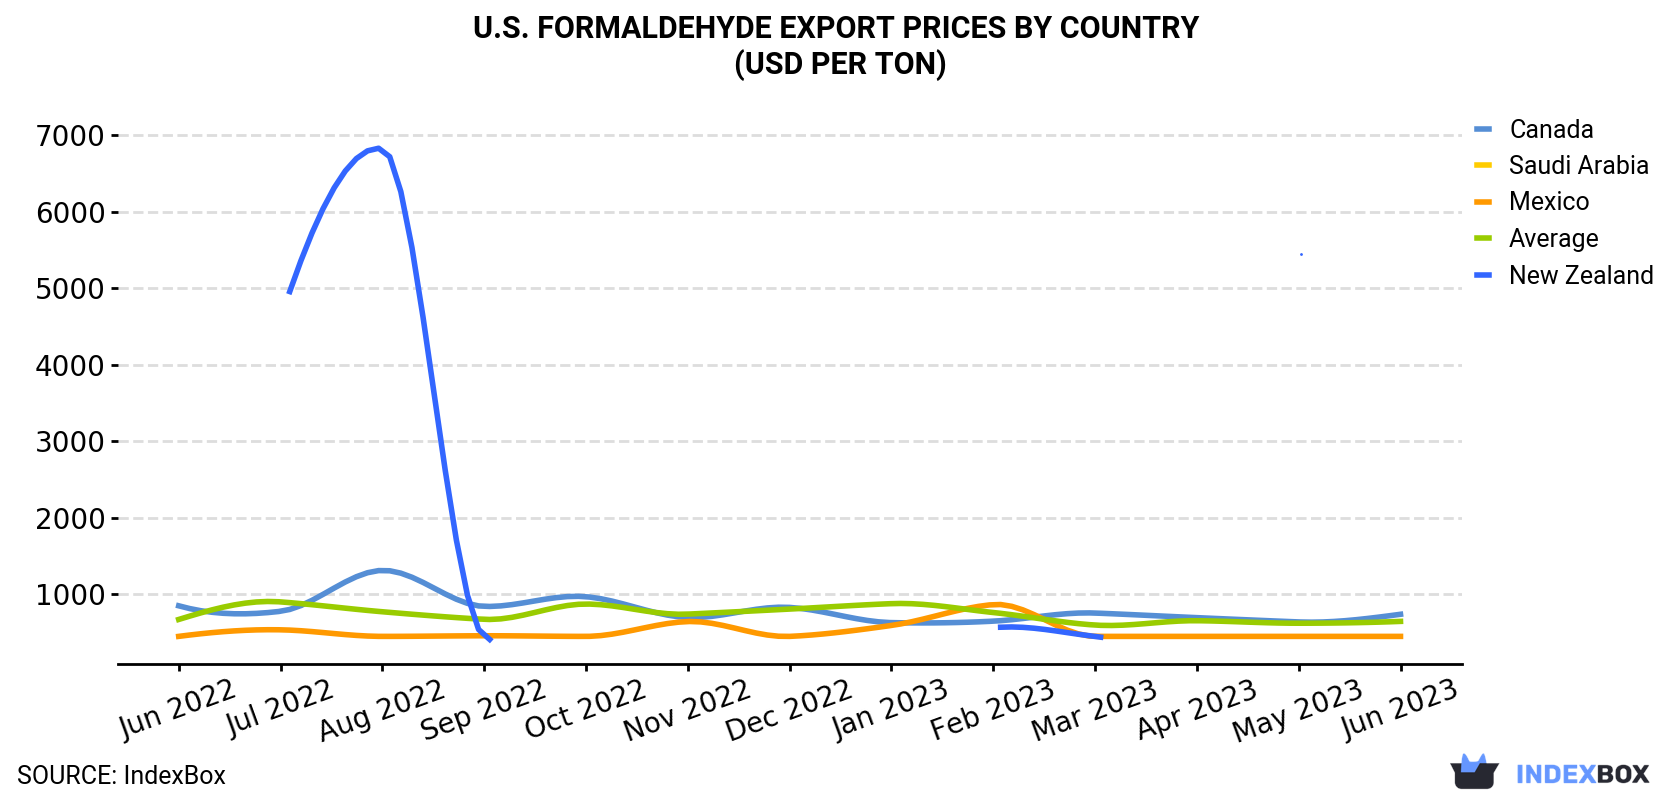 U.S. Formaldehyde Export Prices By Country (USD Per Ton)